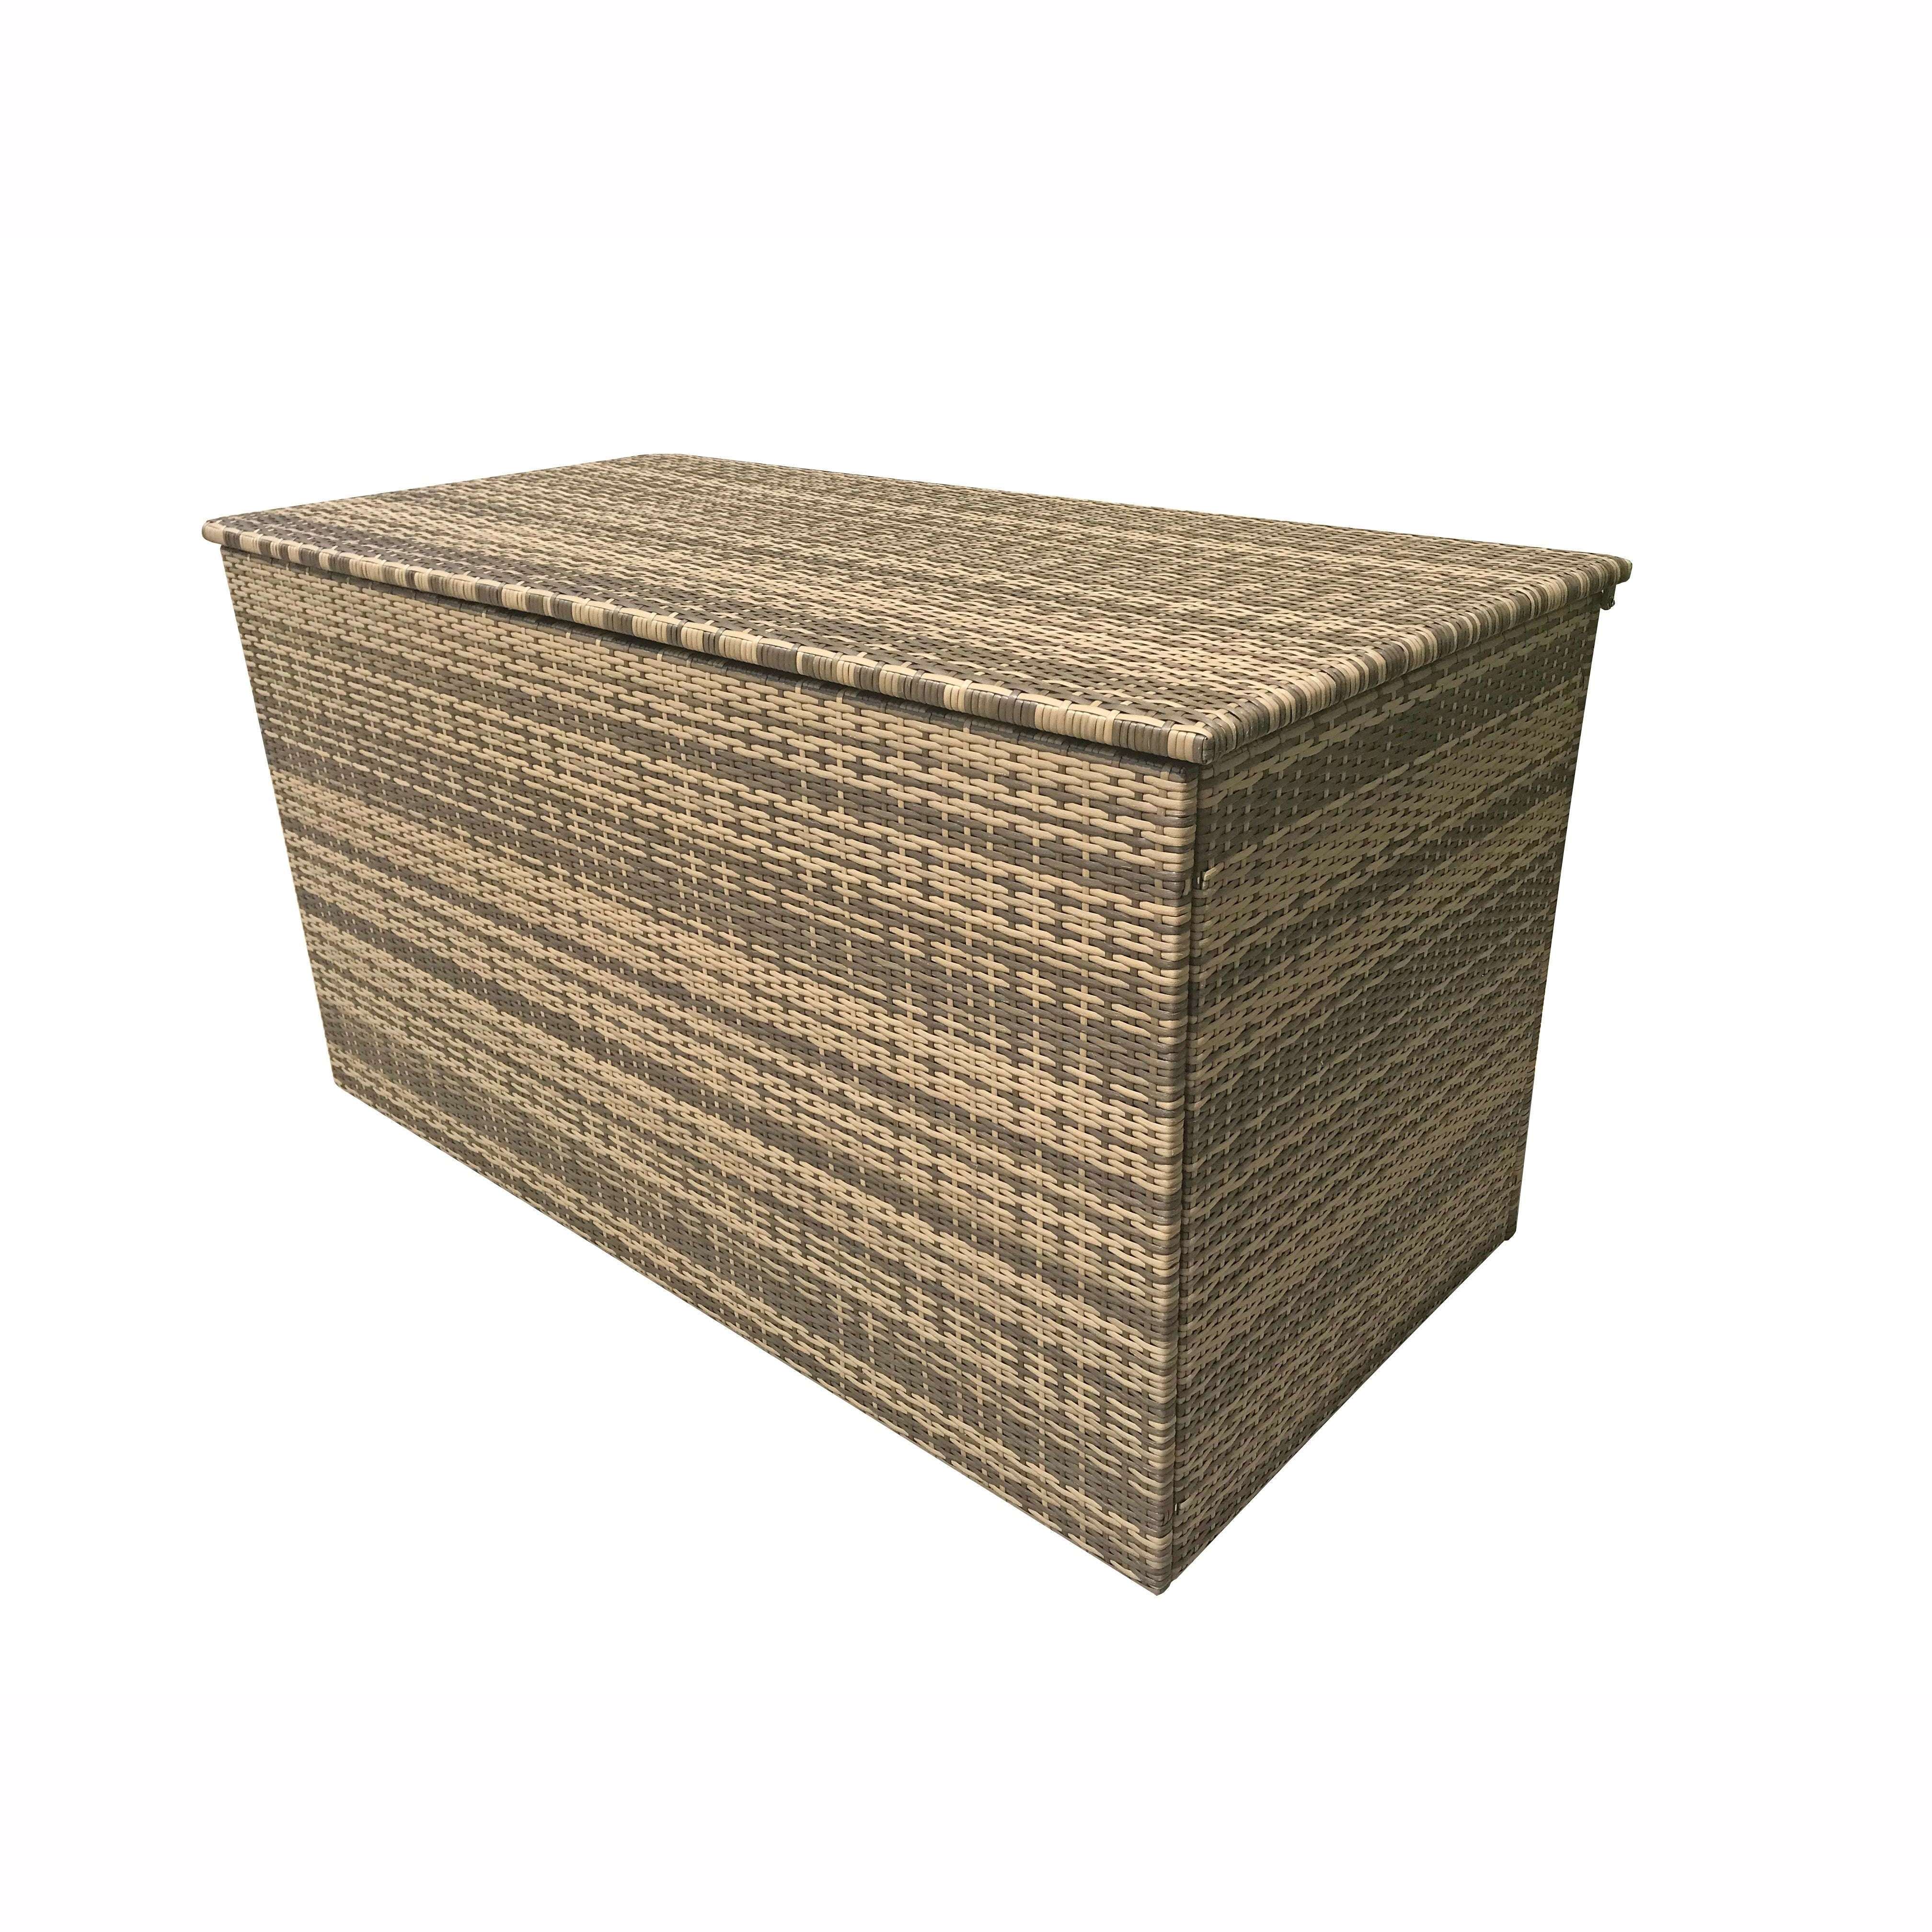 Exceptional Garden:Signature Weave Cushion Box - Large Flat Brown Weave